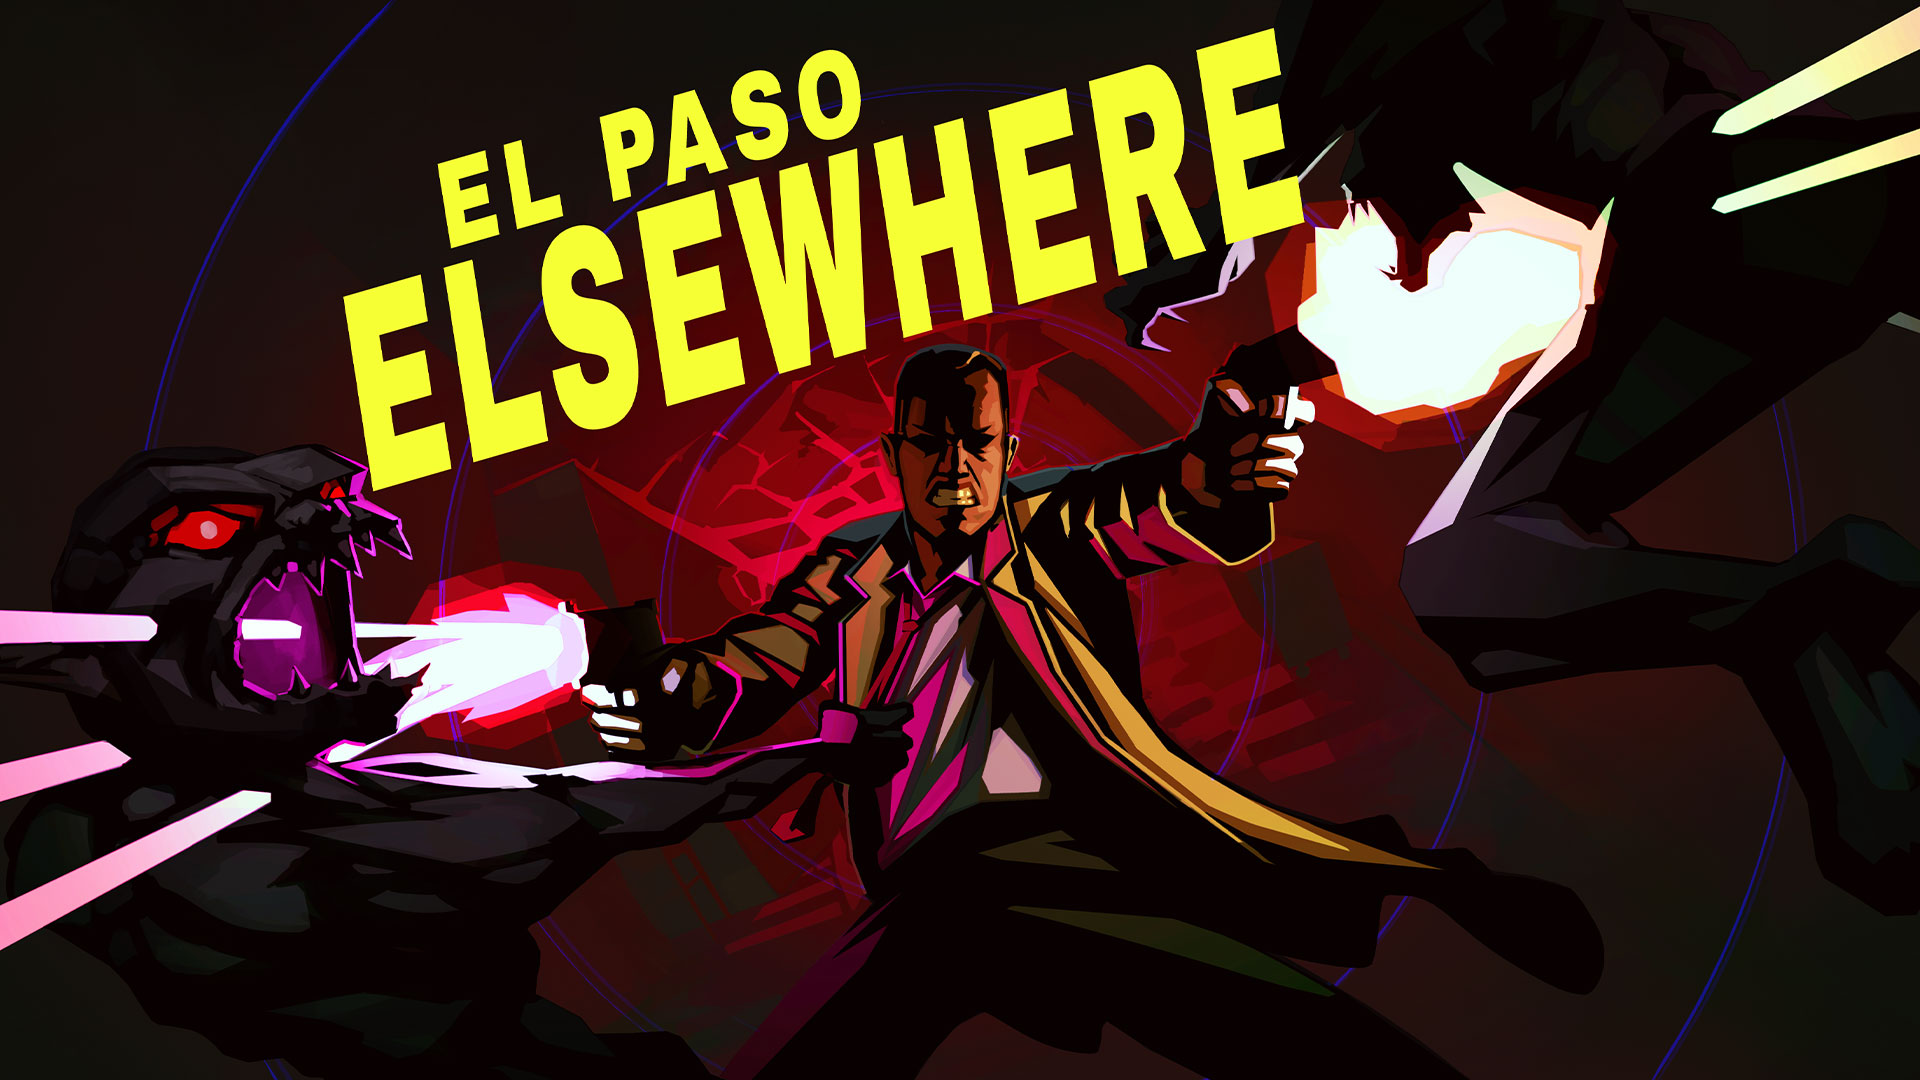 Battle your Way through the Void in Neo-Noir Love Story El Paso, Elsewhere